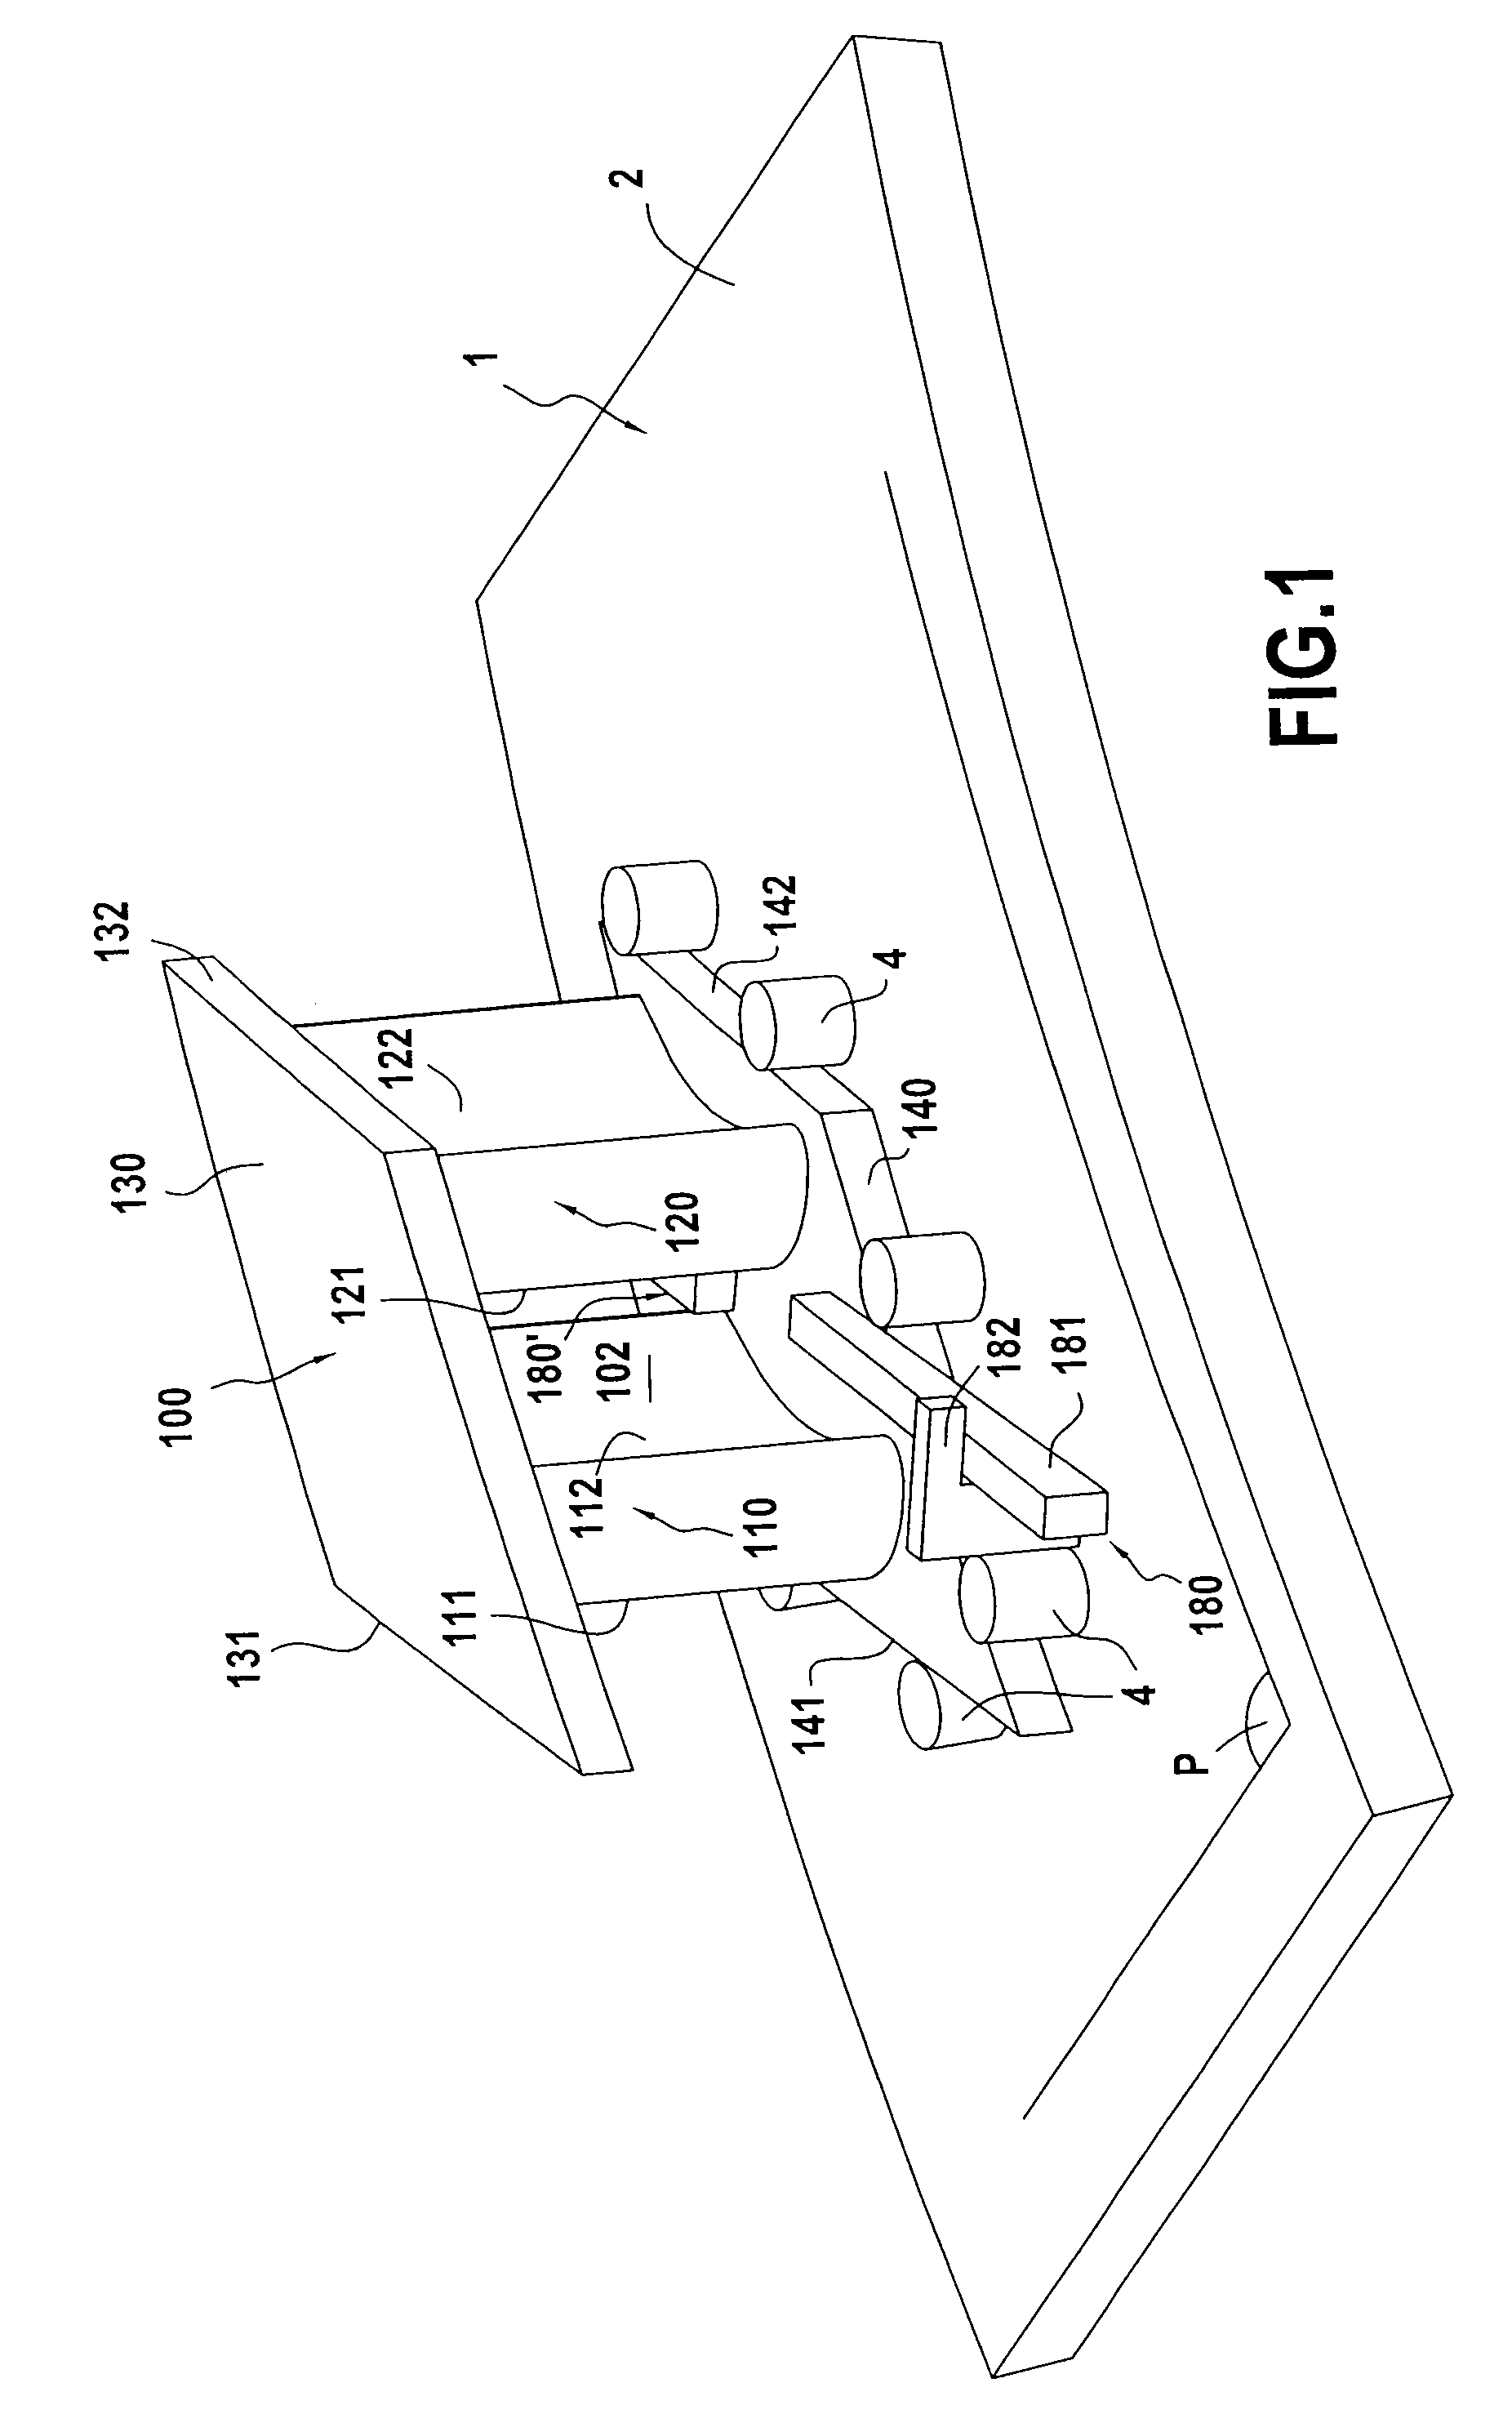 Method of measuring flow sections of a turbomachine nozzle sector by digitizing